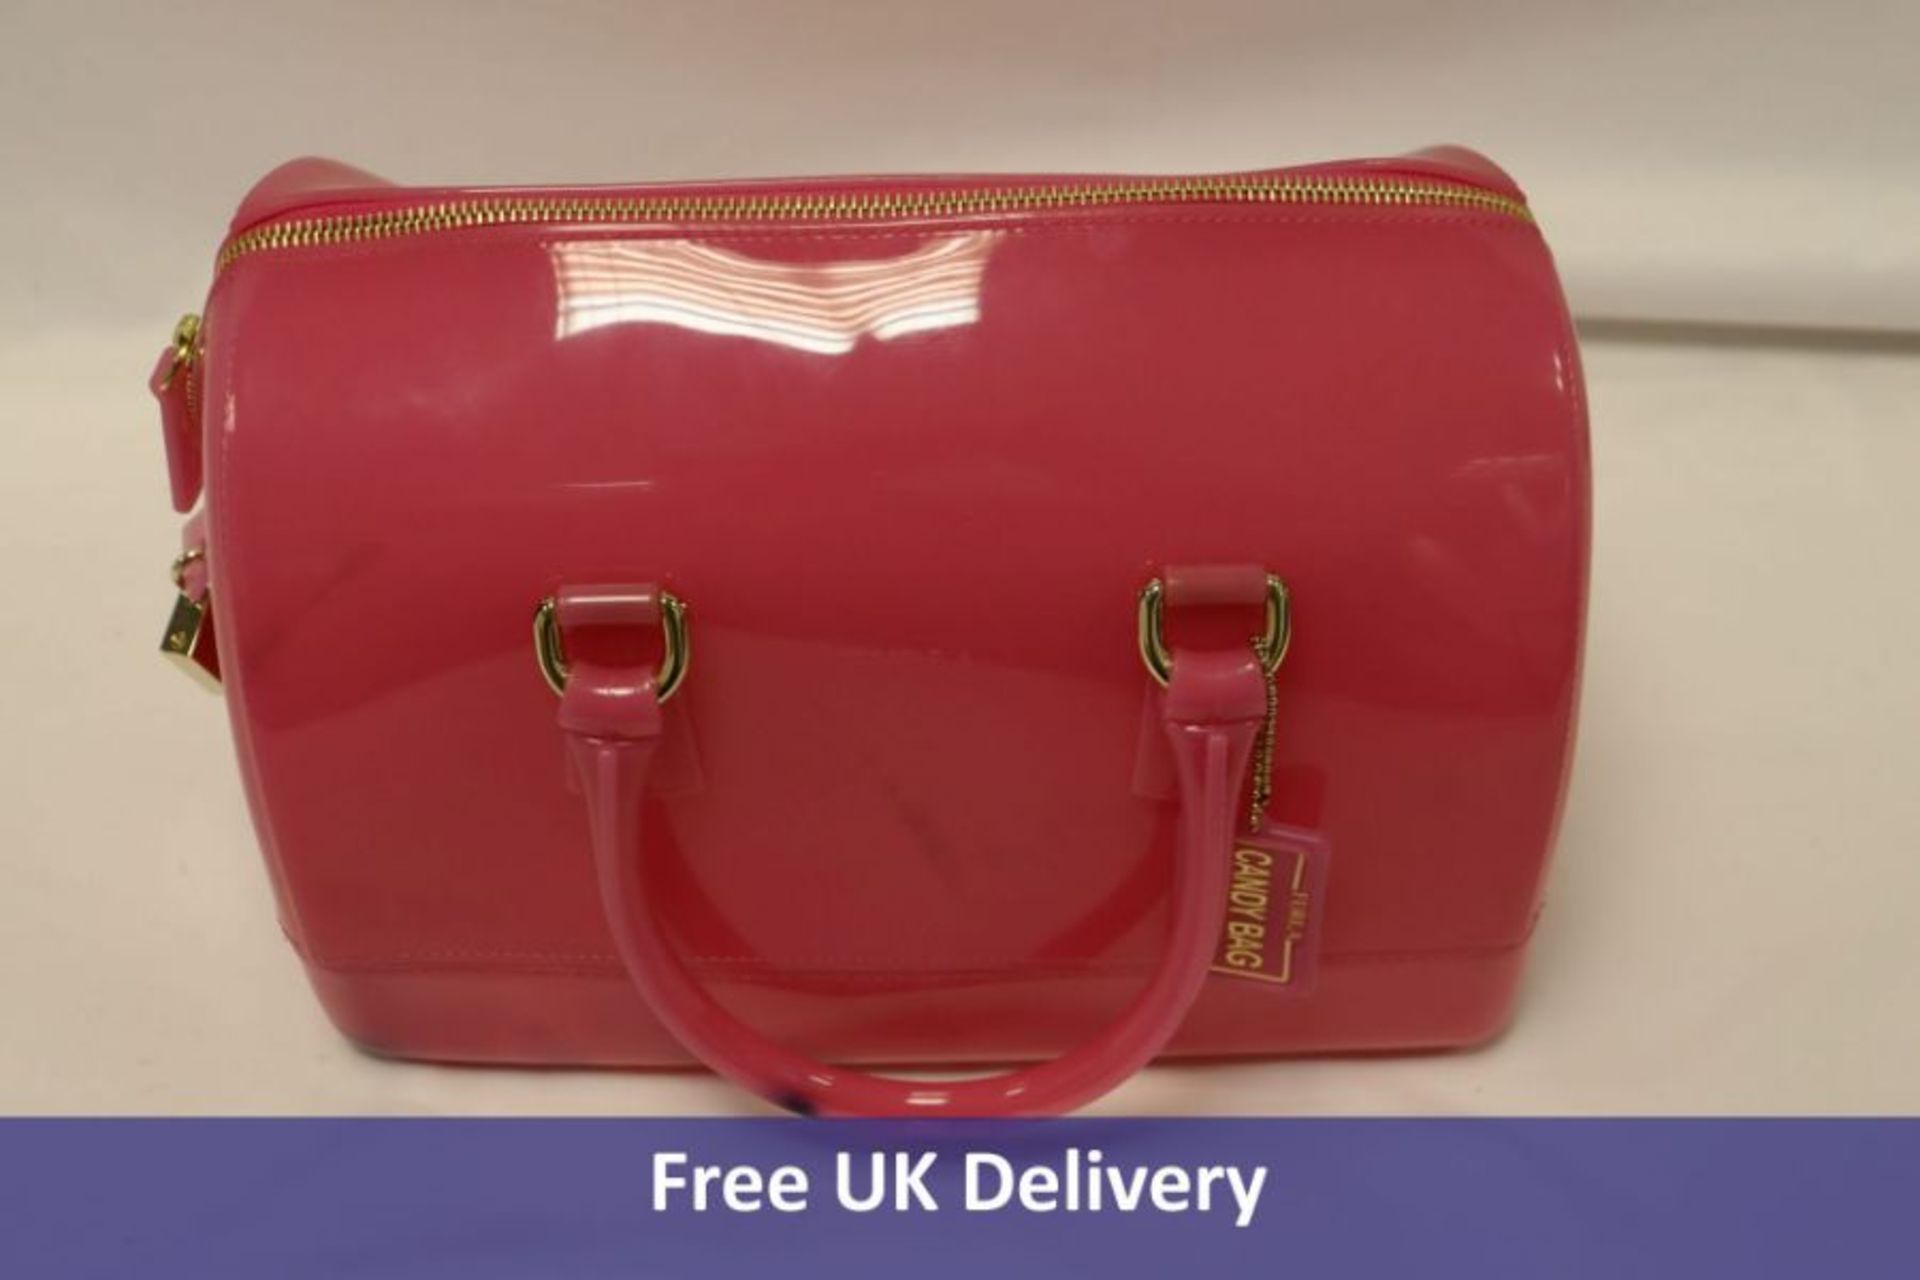 Furla Candy Satchel Top Handle Jelly Rubber Bag, Pink. Used